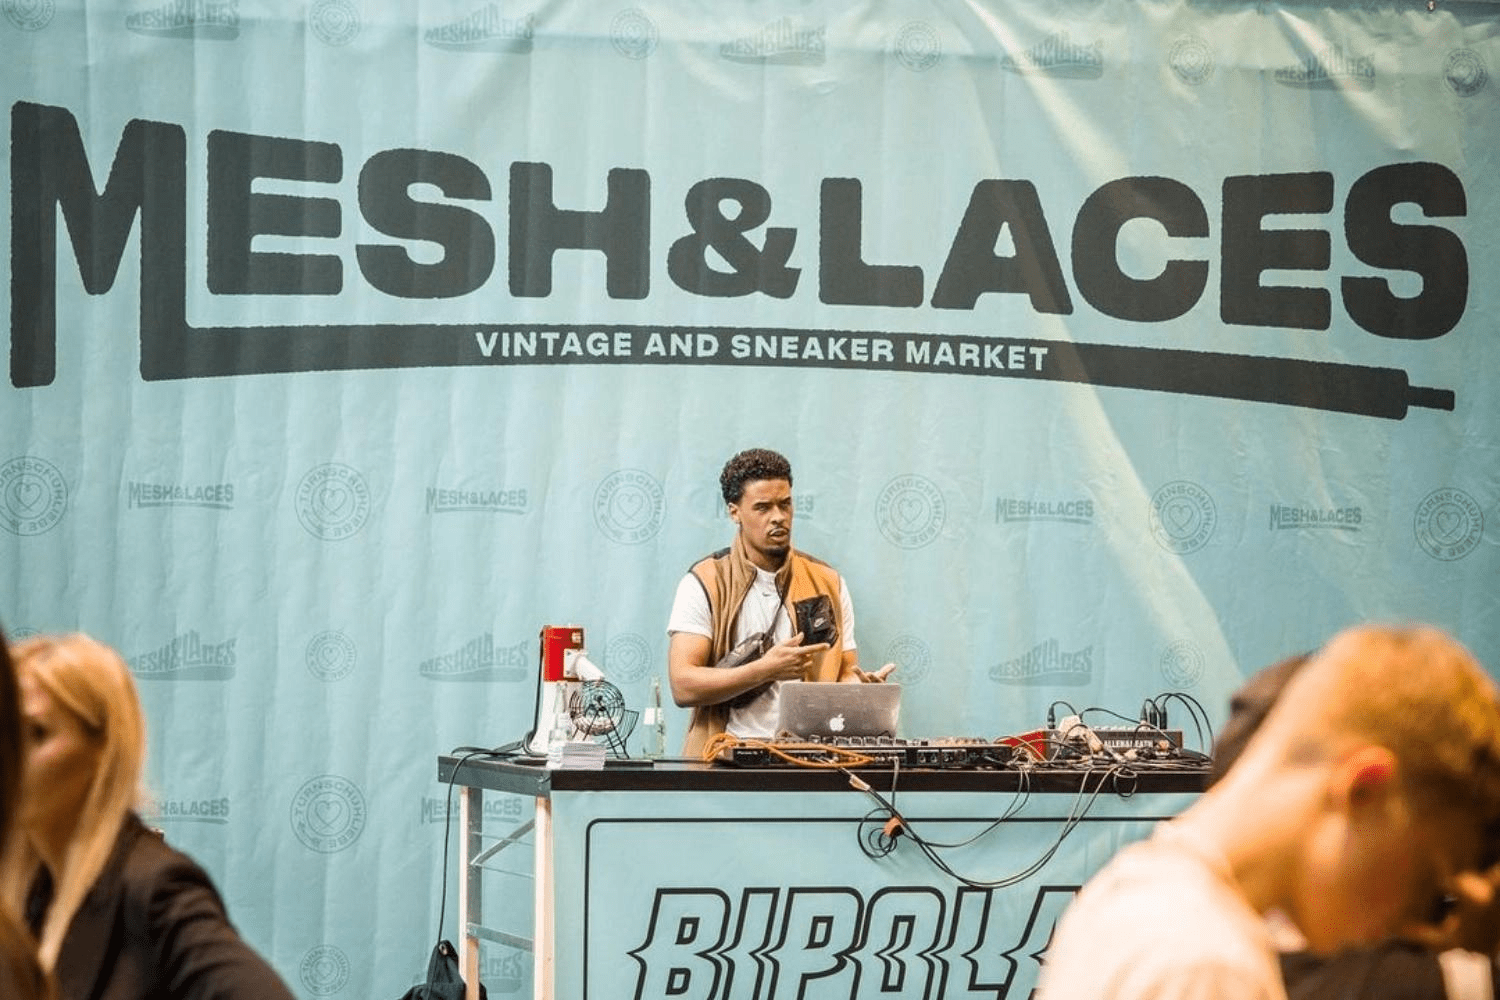 Mesh & Laces Vintage & Sneaker Market 2023 - here is what you need to know